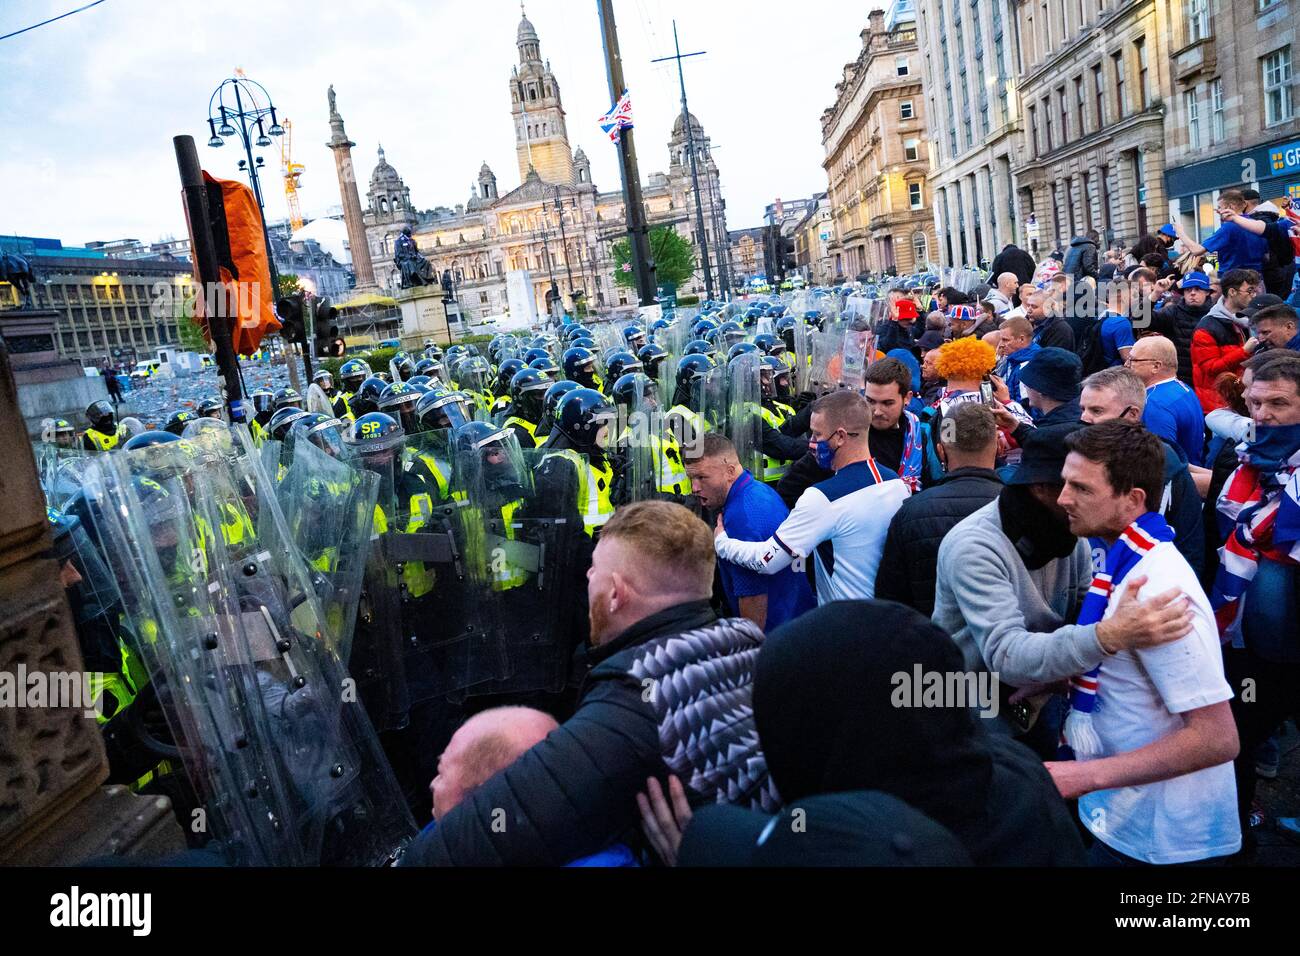 Glasgow, Scotland, UK. 15 May 202. Rangers football supporters  celebrating 55th league victory are cleared from George Square by police in riot gear on Saturday evening. In very violent scenes police were pelted with bottles and items from a nearby construction site as police pushed the supporters into the south west corner of the square. Pic; Violent clashes between police and fans.  Iain Masterton/Alamy Live News. Stock Photo